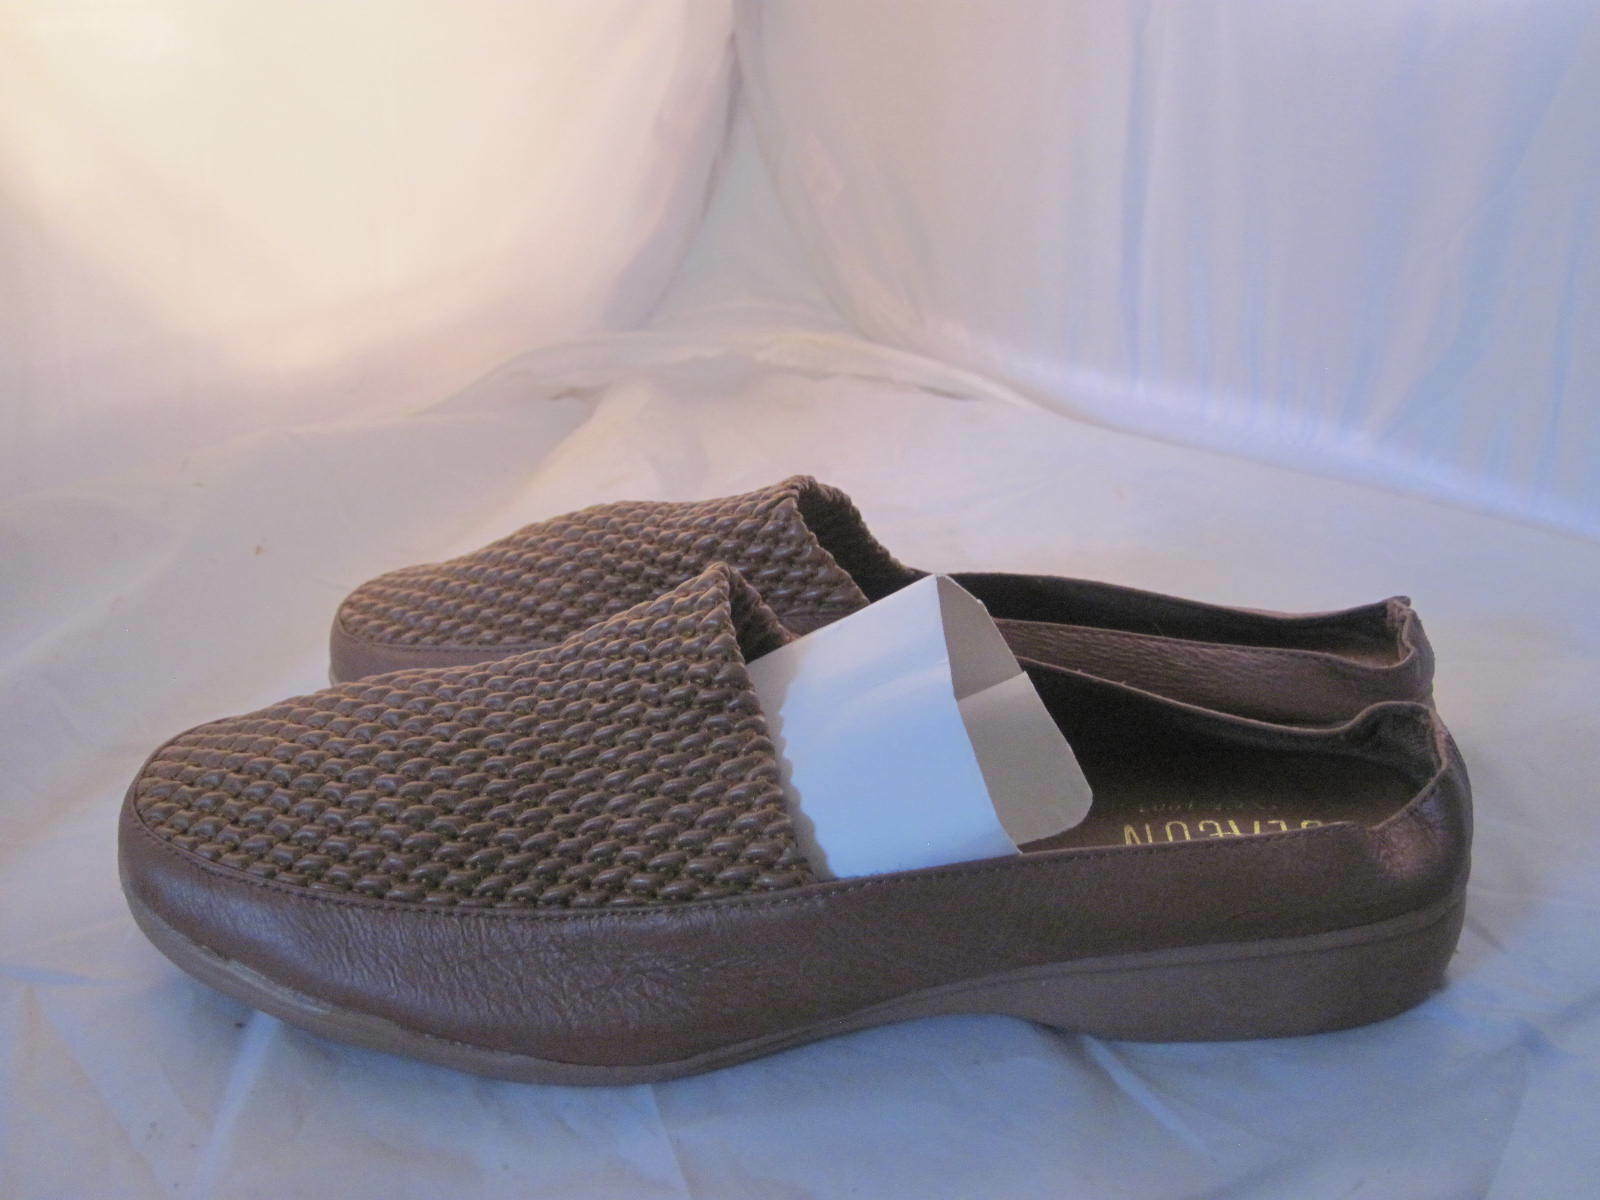 Beacon Stretch N Form Slip on Women's shoes Brown 8.5 M very ...